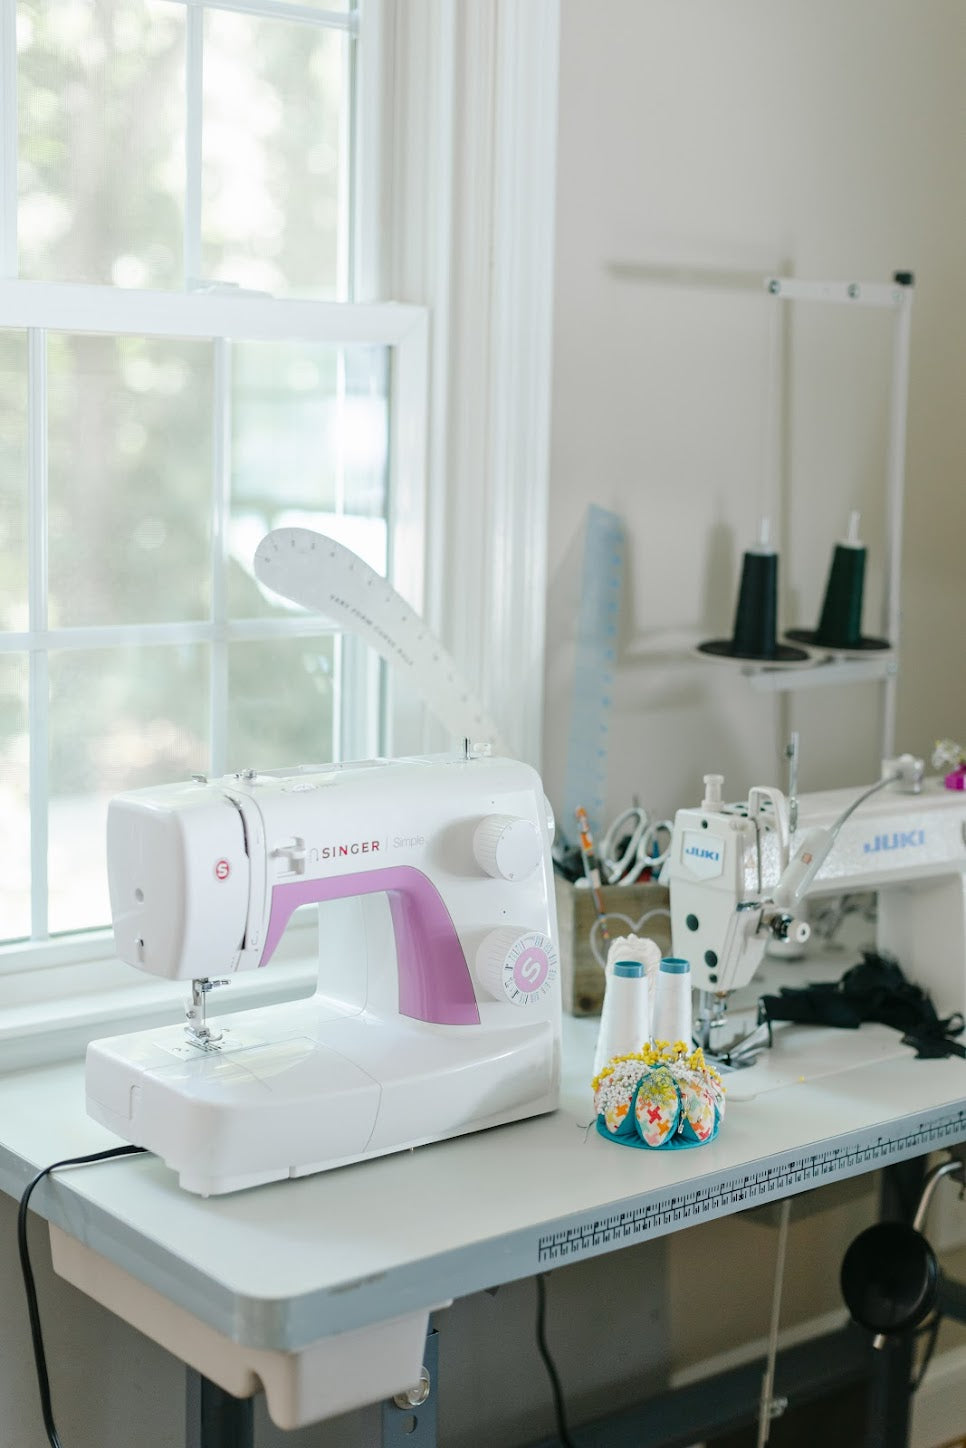 Sewing Machines for Wedding Alterations